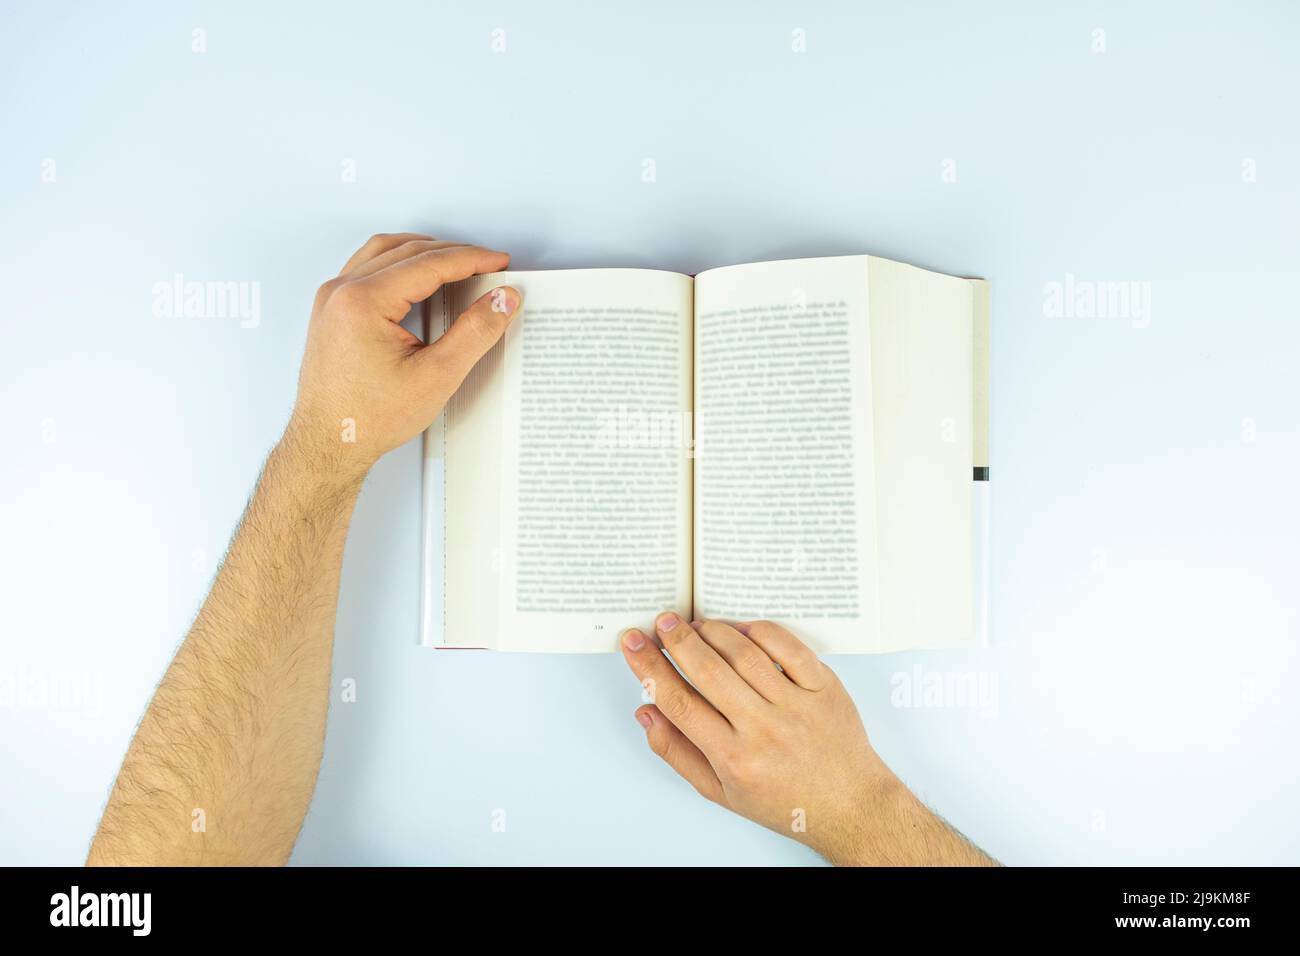 Man hands with open book page isolated on white background, reading book concept, studying and learning idea, top view of book Stock Photo